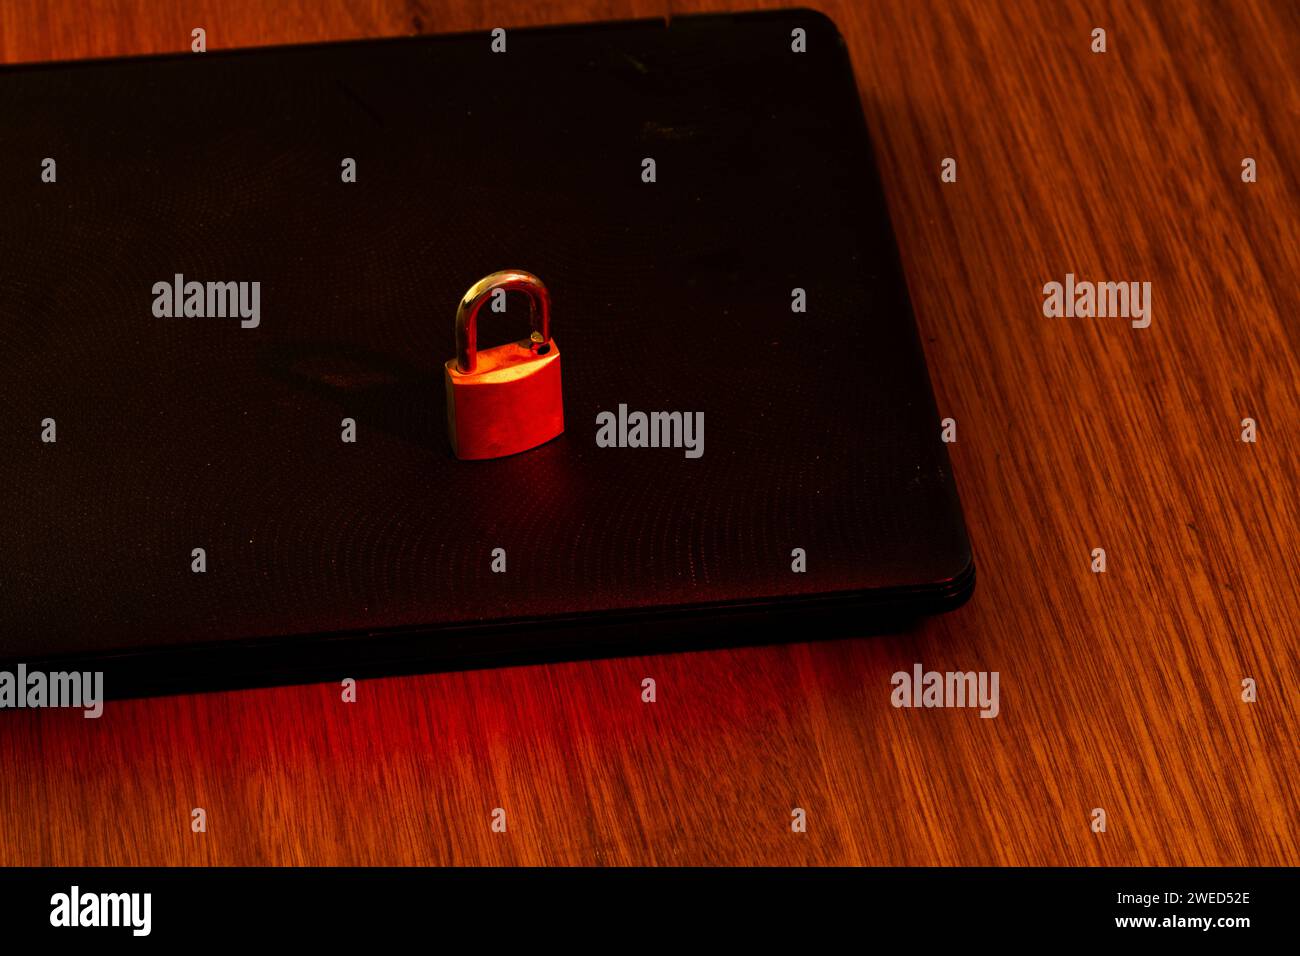 laptop with a padlock on it, cyber security, cyber lock Stock Photo